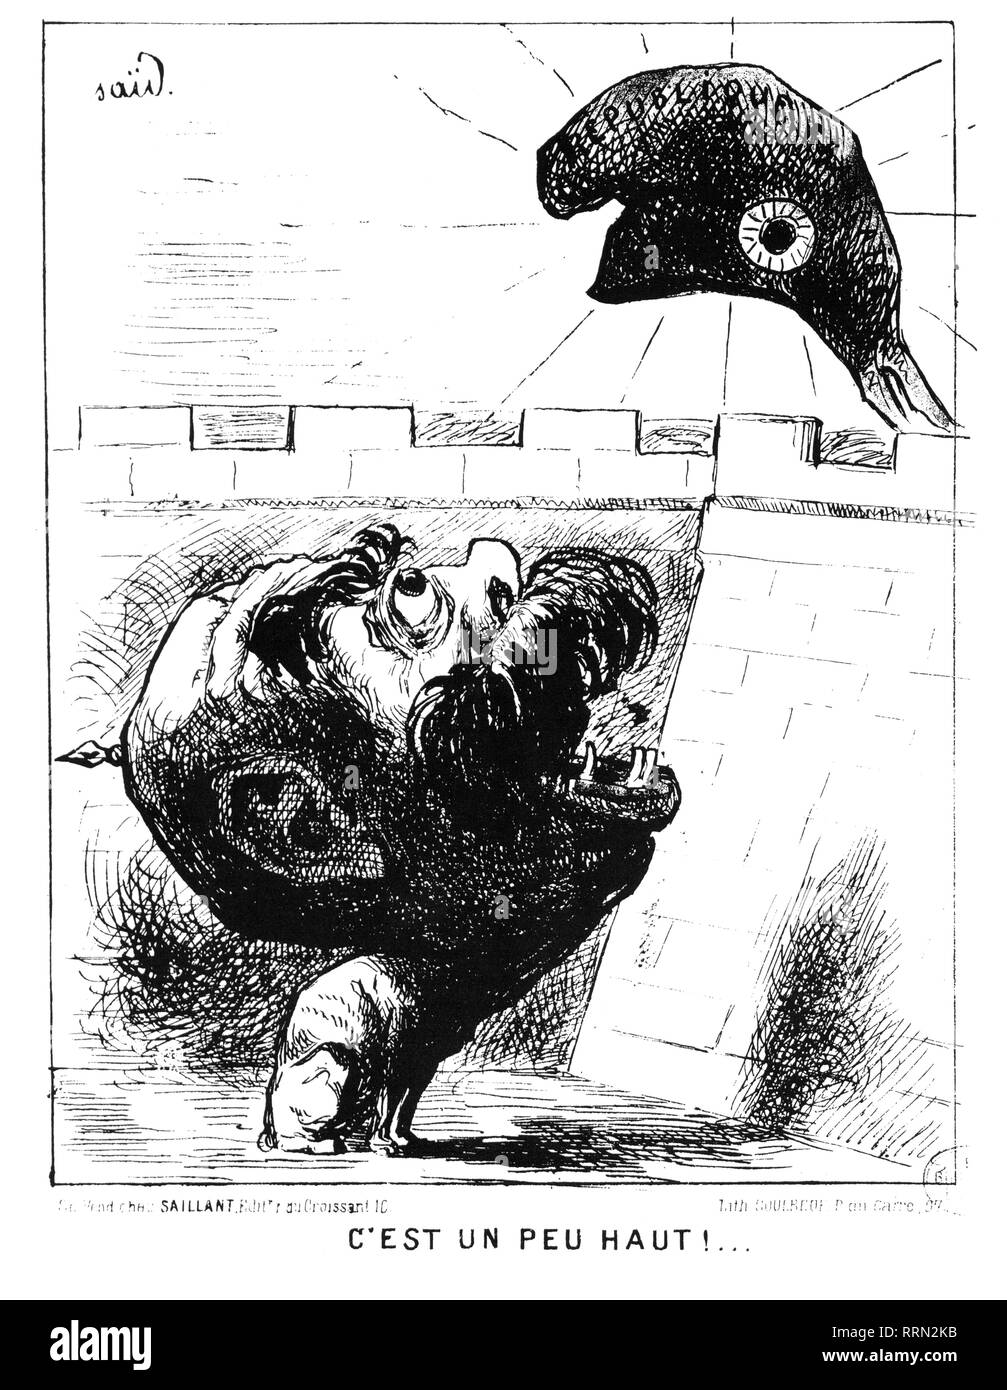 Bismarck, Otto von, 1.4.1815 - 30.7.1898, German politician, caricature, the dog Bismarck barking in vain at the republic, 'A little to high', broadsheet, Paris, late 1870, Additional-Rights-Clearance-Info-Not-Available Stock Photo